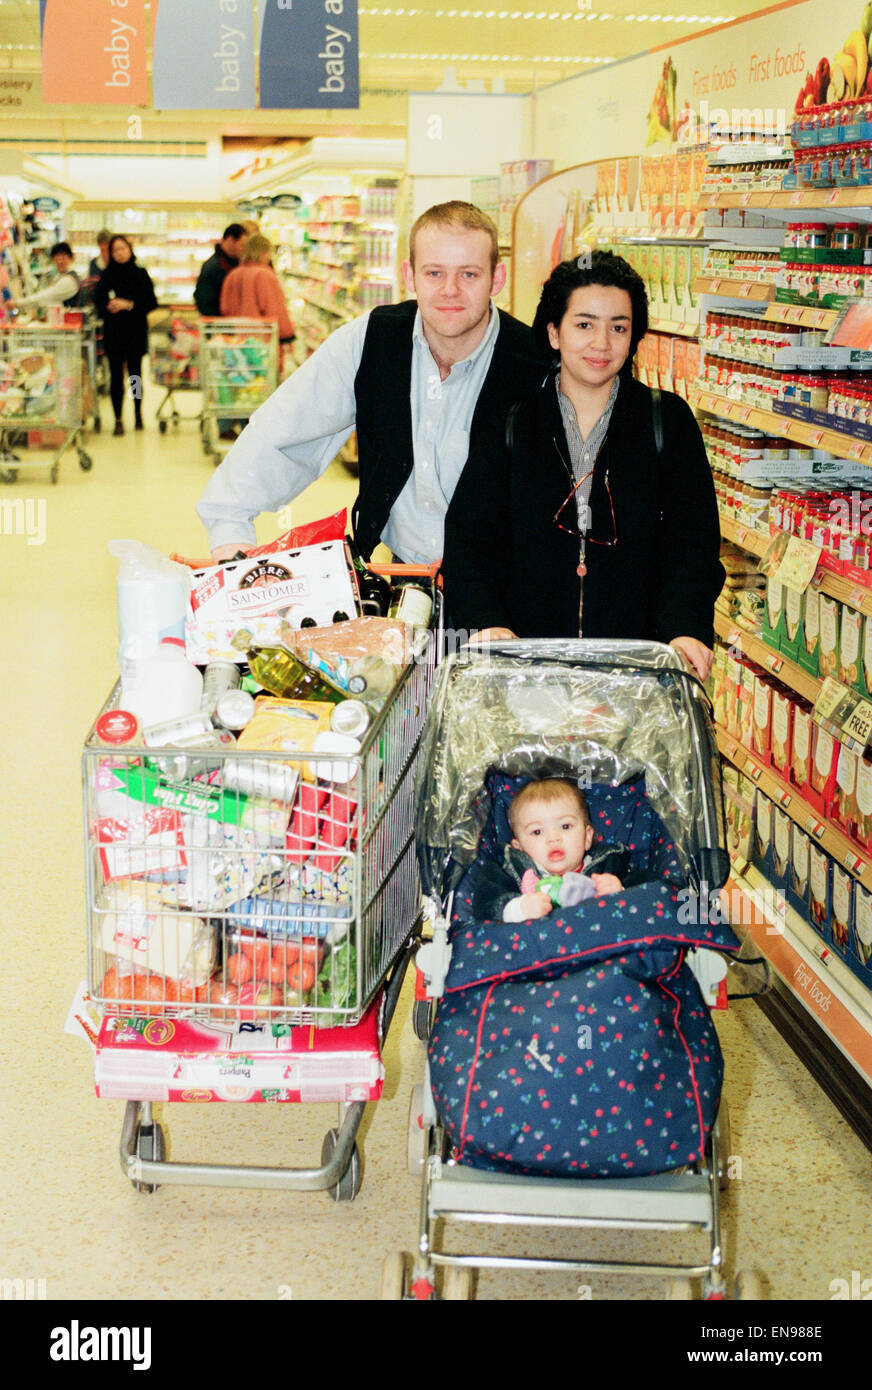 Huw Higginson, actor a.k.a. PC George Garfield in The Bill, takes part in My Shopping Trolley Feature, 28th March 1996. Pictured with family, girlfriend Geraldine Dove & daughter Megan. Stock Photo